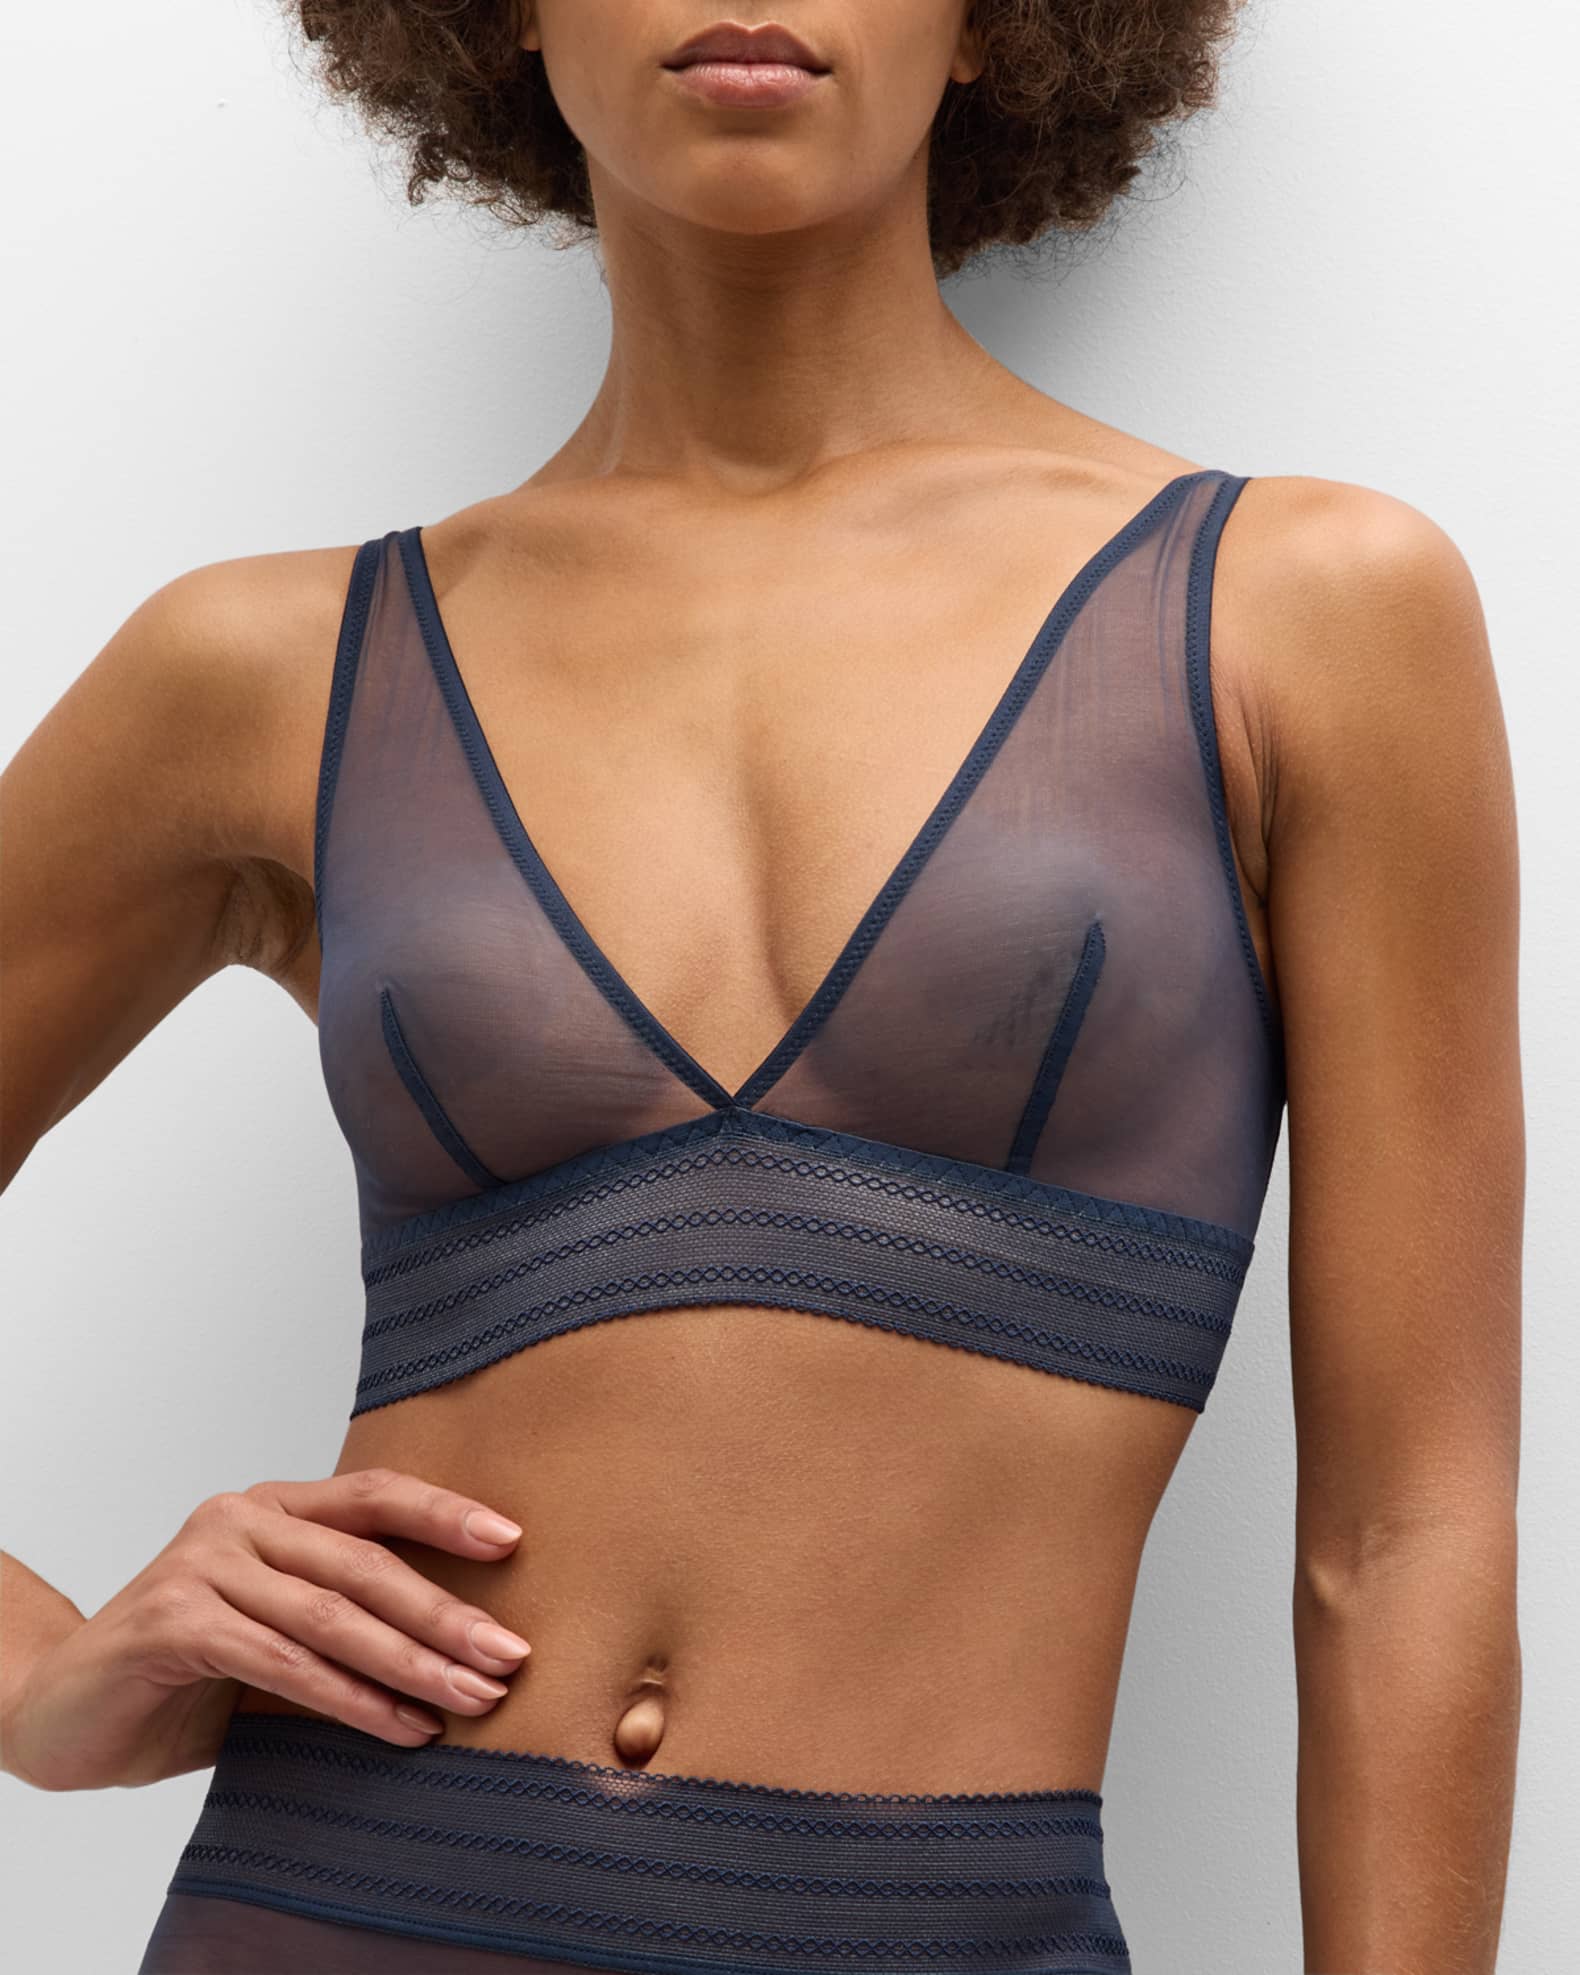 From Straps to Striking: Convertible Bras for Every Wardrobe - Cosabella